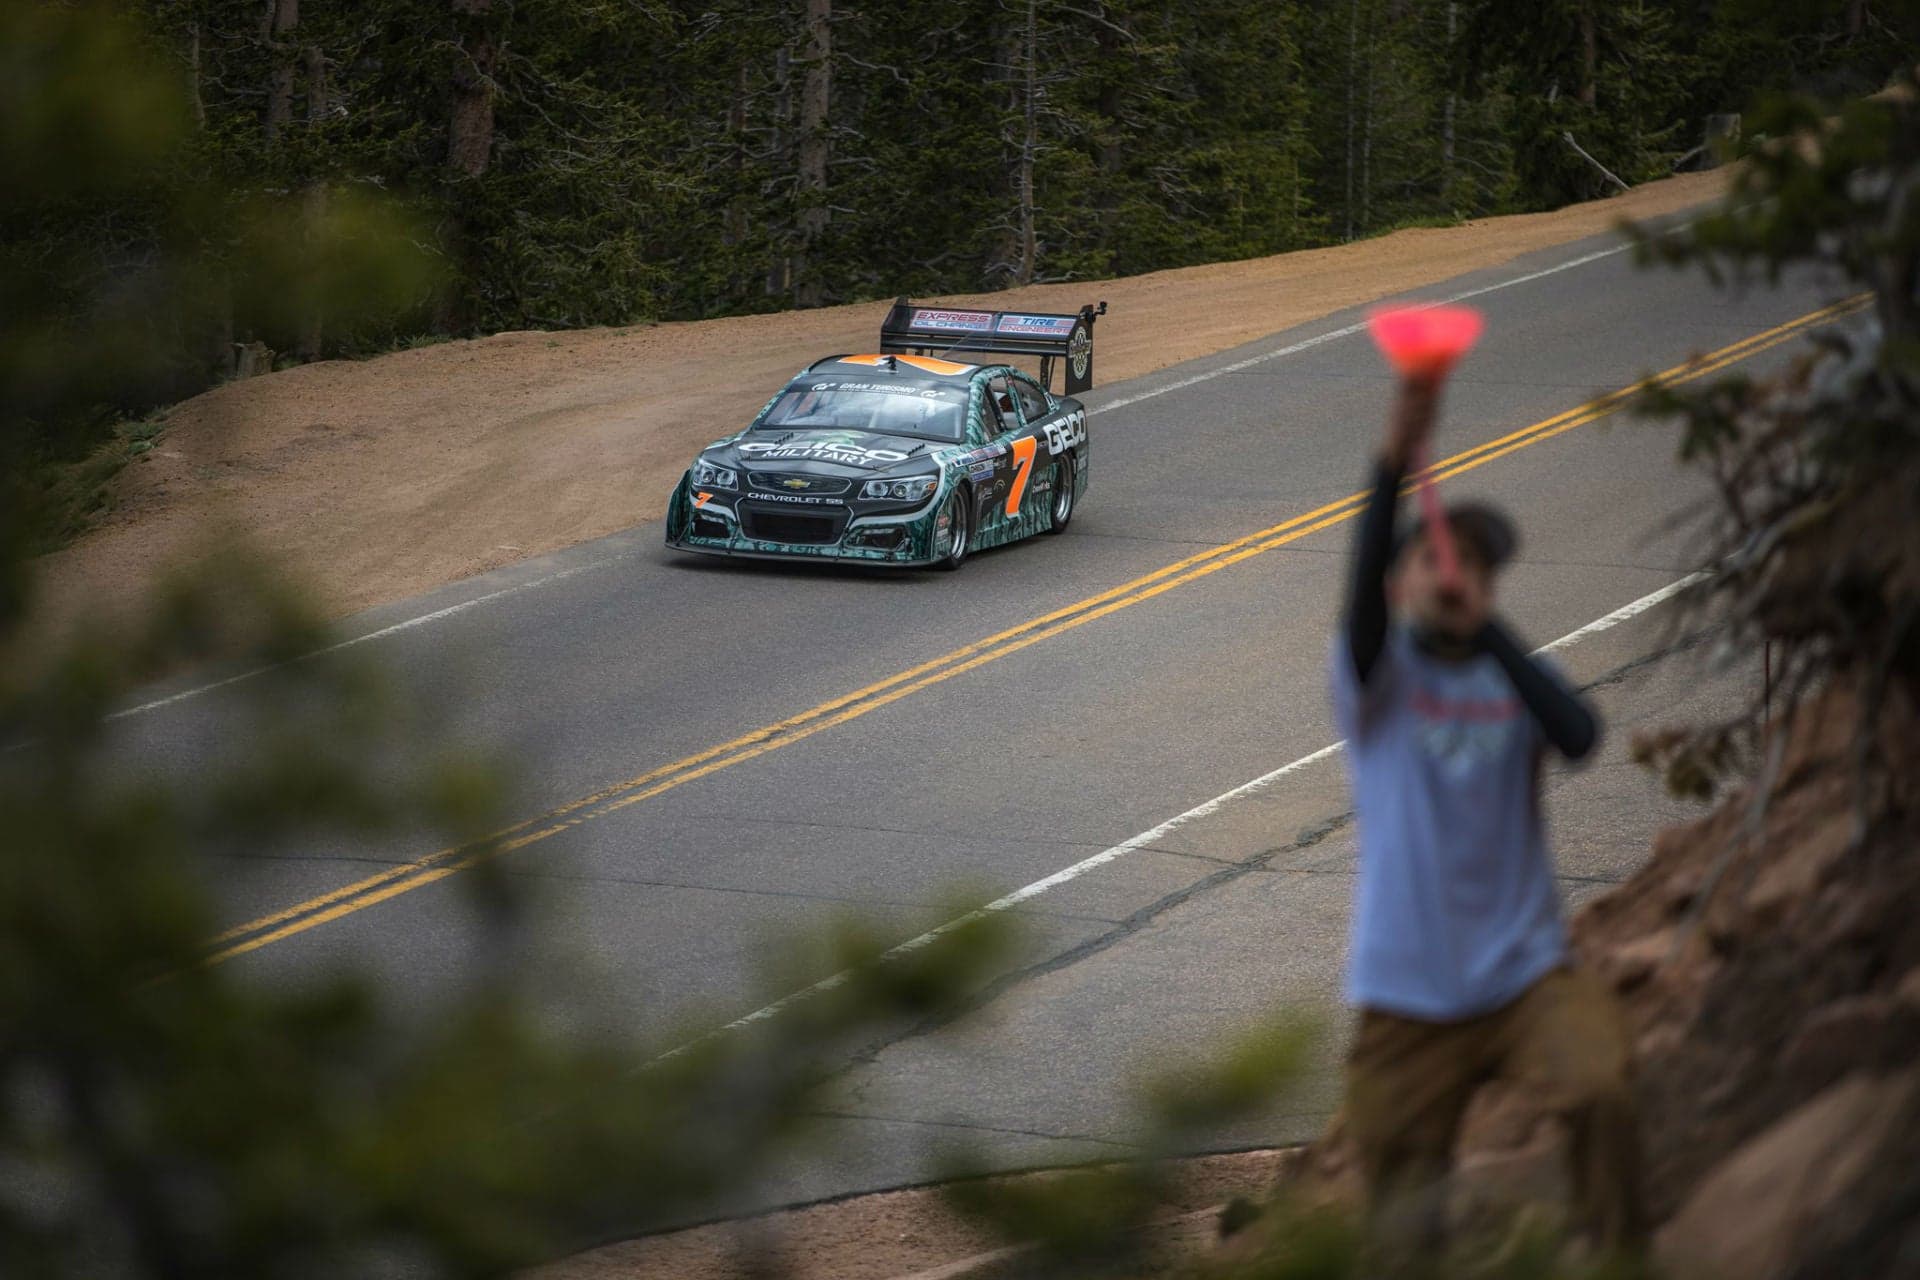 UPDATE: Man Trying to Help Crashed Racer at Pikes Peak Gets Rounded up by Police